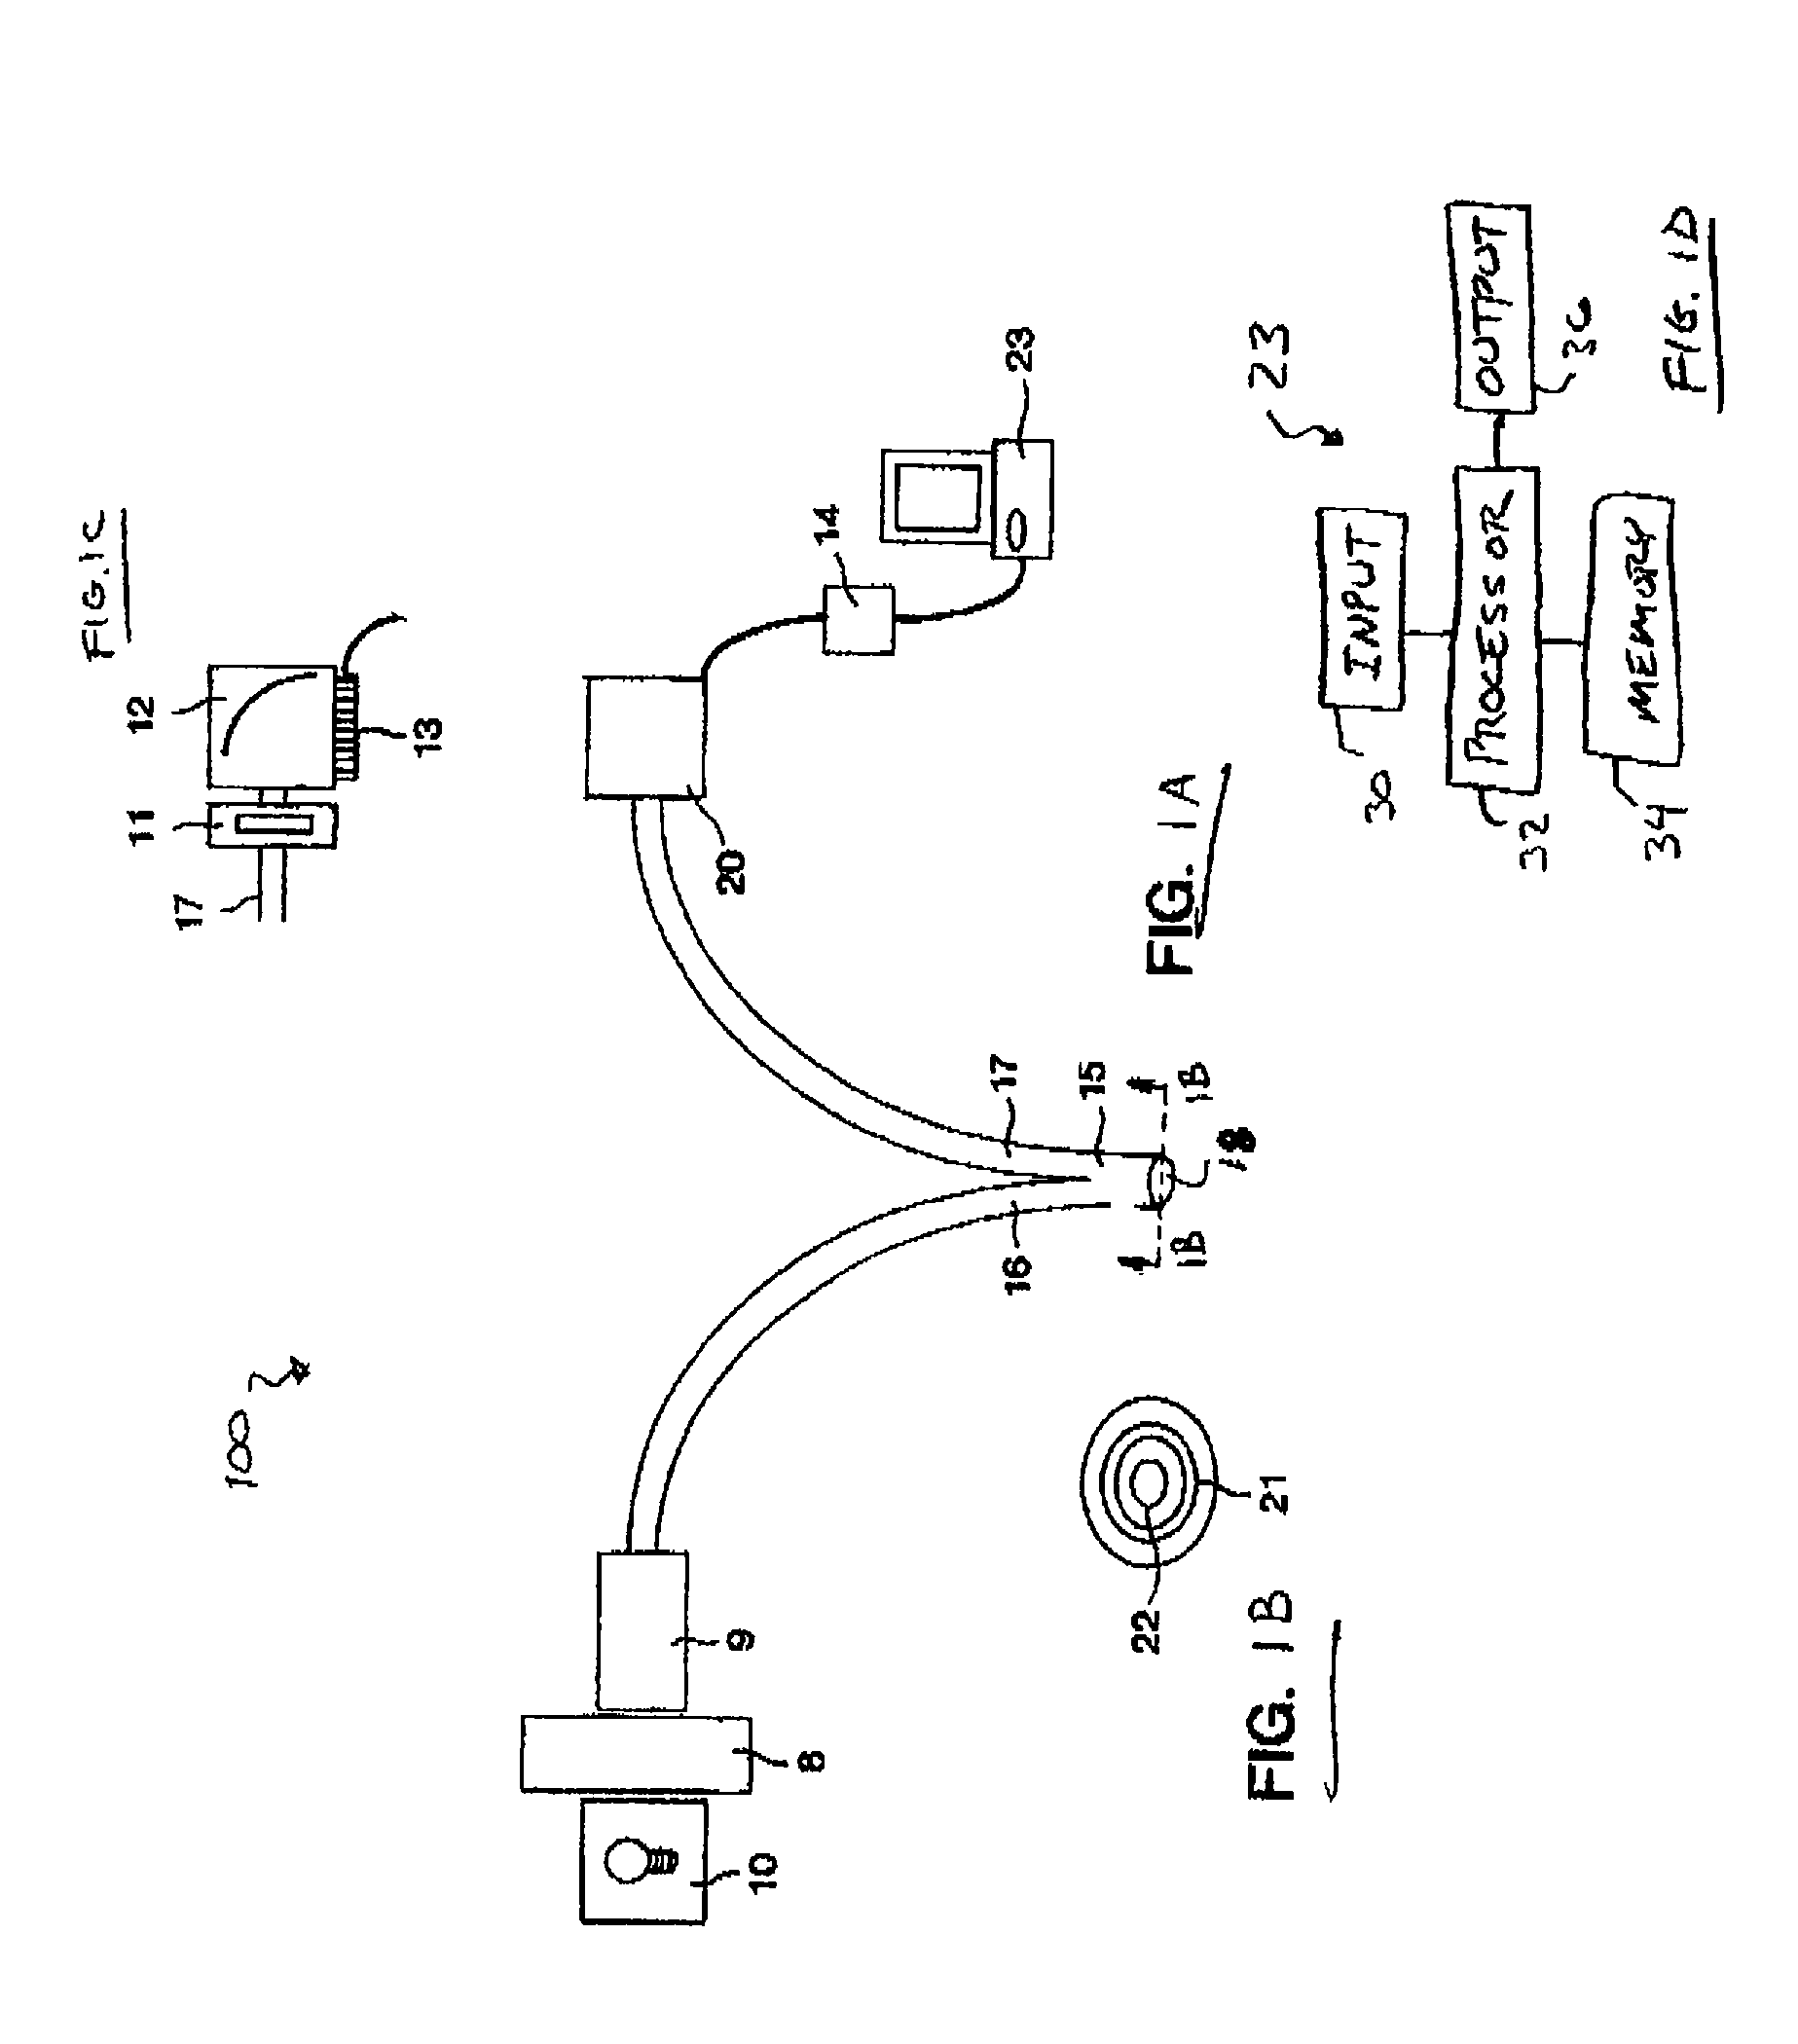 Method and system for determining the contribution of hemoglobin and myoglobin to in vivo optical spectra